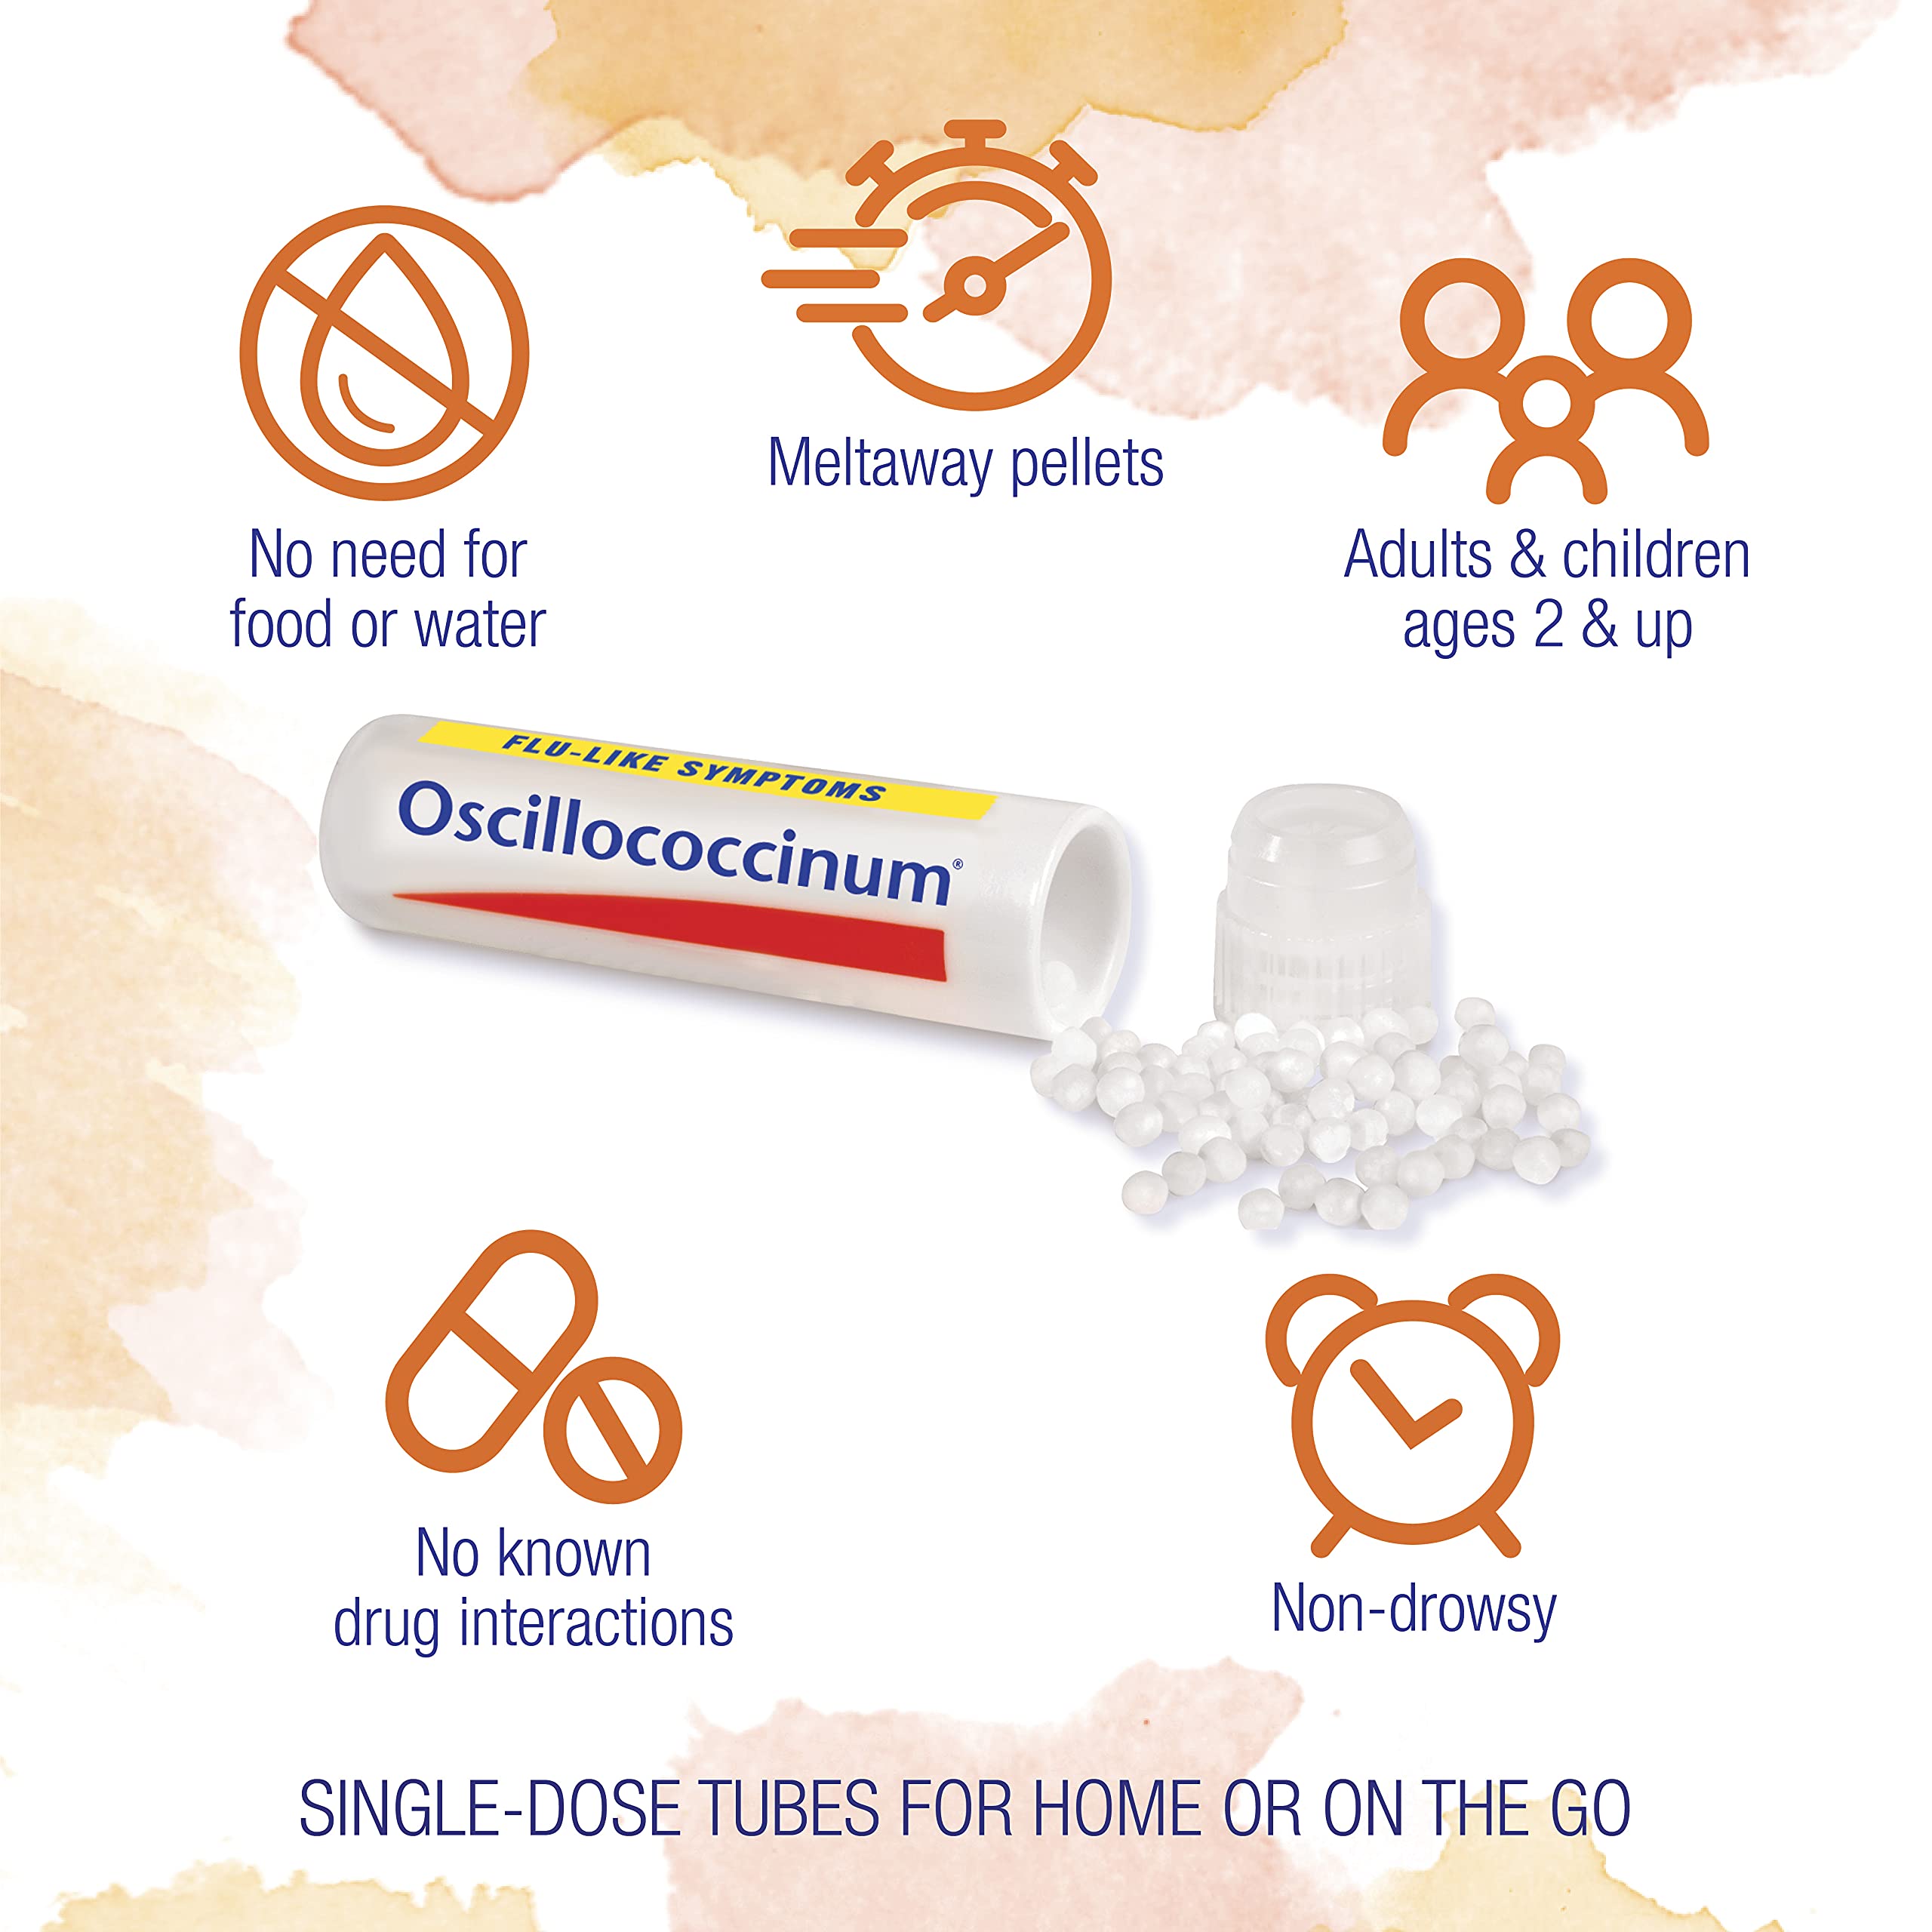 Boiron Oscillococcinum for Relief from Flu-Like Symptoms of Body Aches, Headache, Fever, Chills, and Fatigue - 12 Count